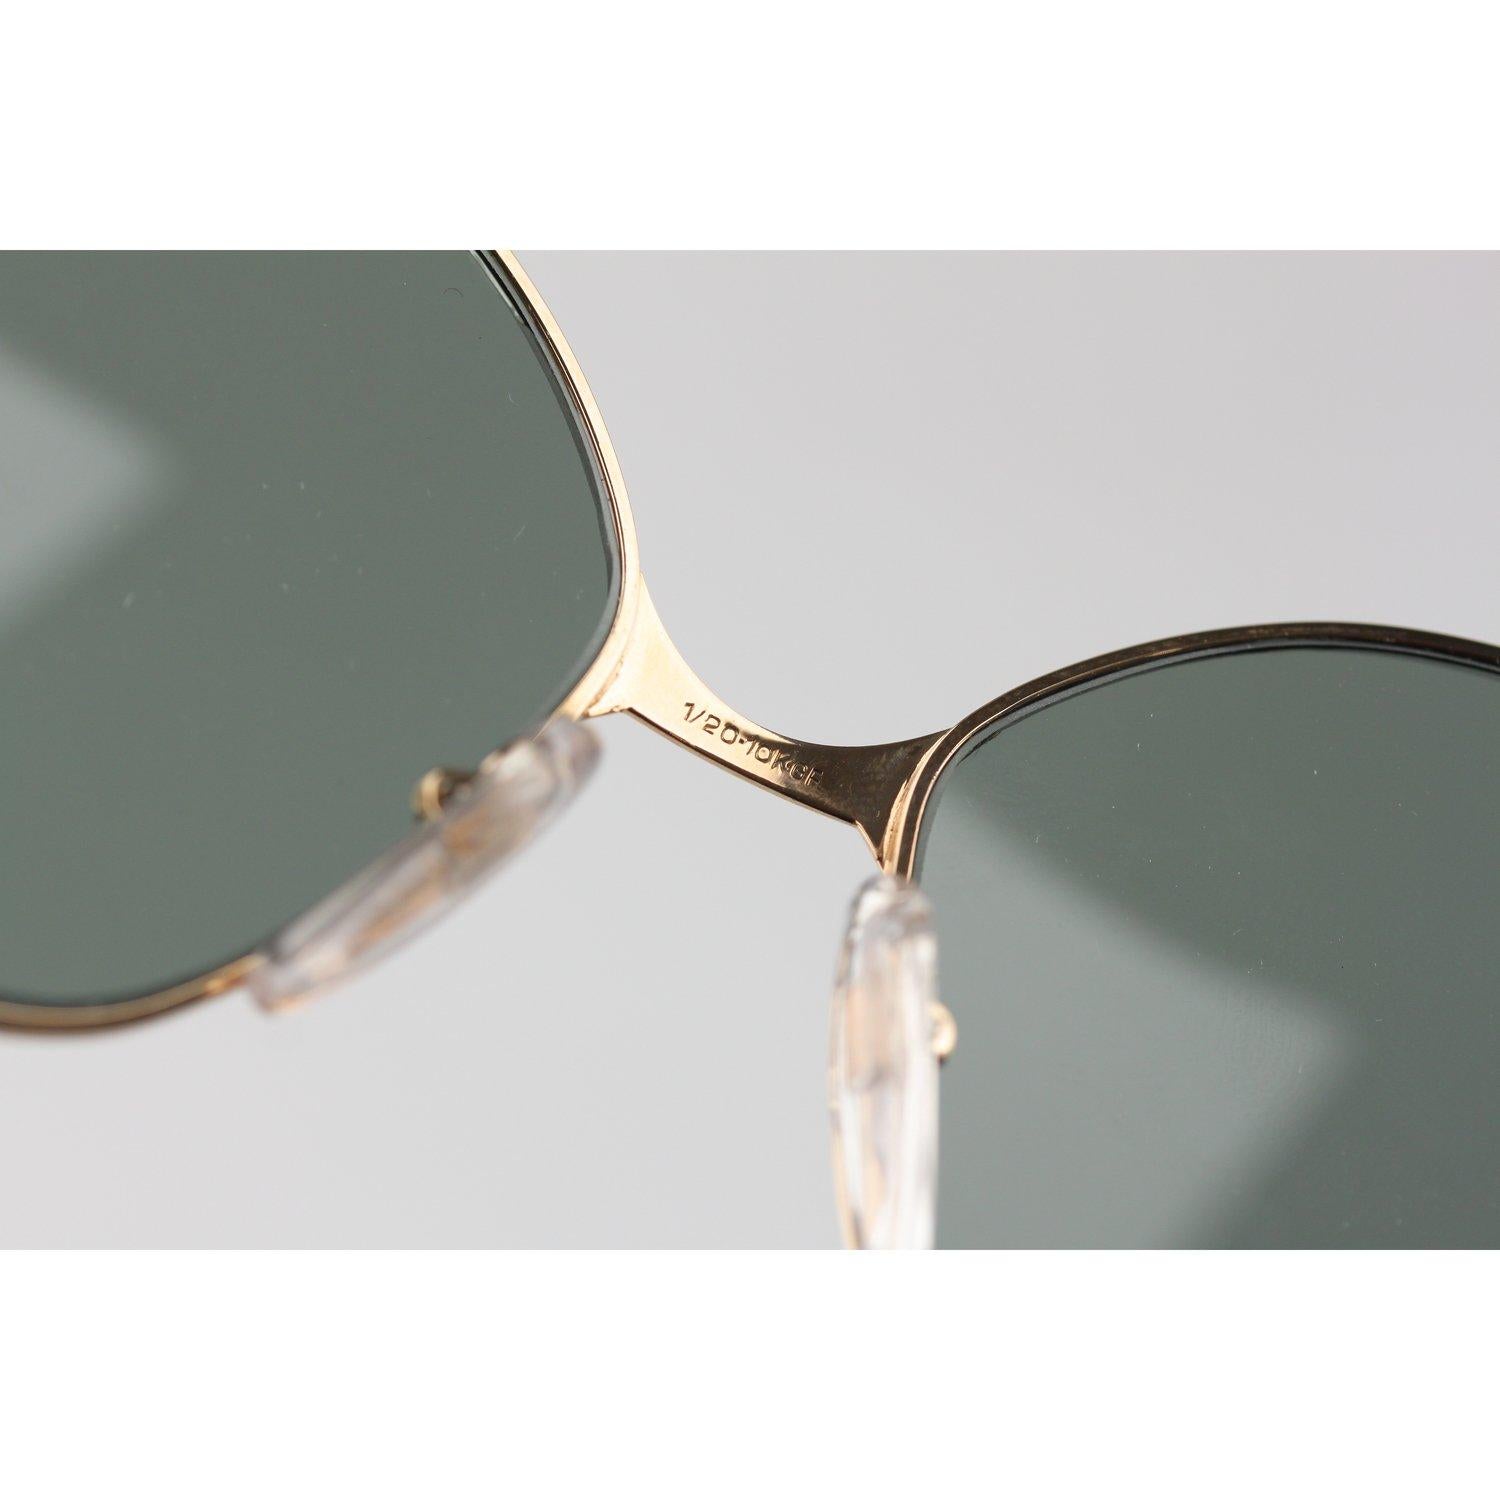 Vogue D'Or by Bausch & Lomb 1/20 10K GF Gold Mint Sunglasses Mod 516 For Sale 1